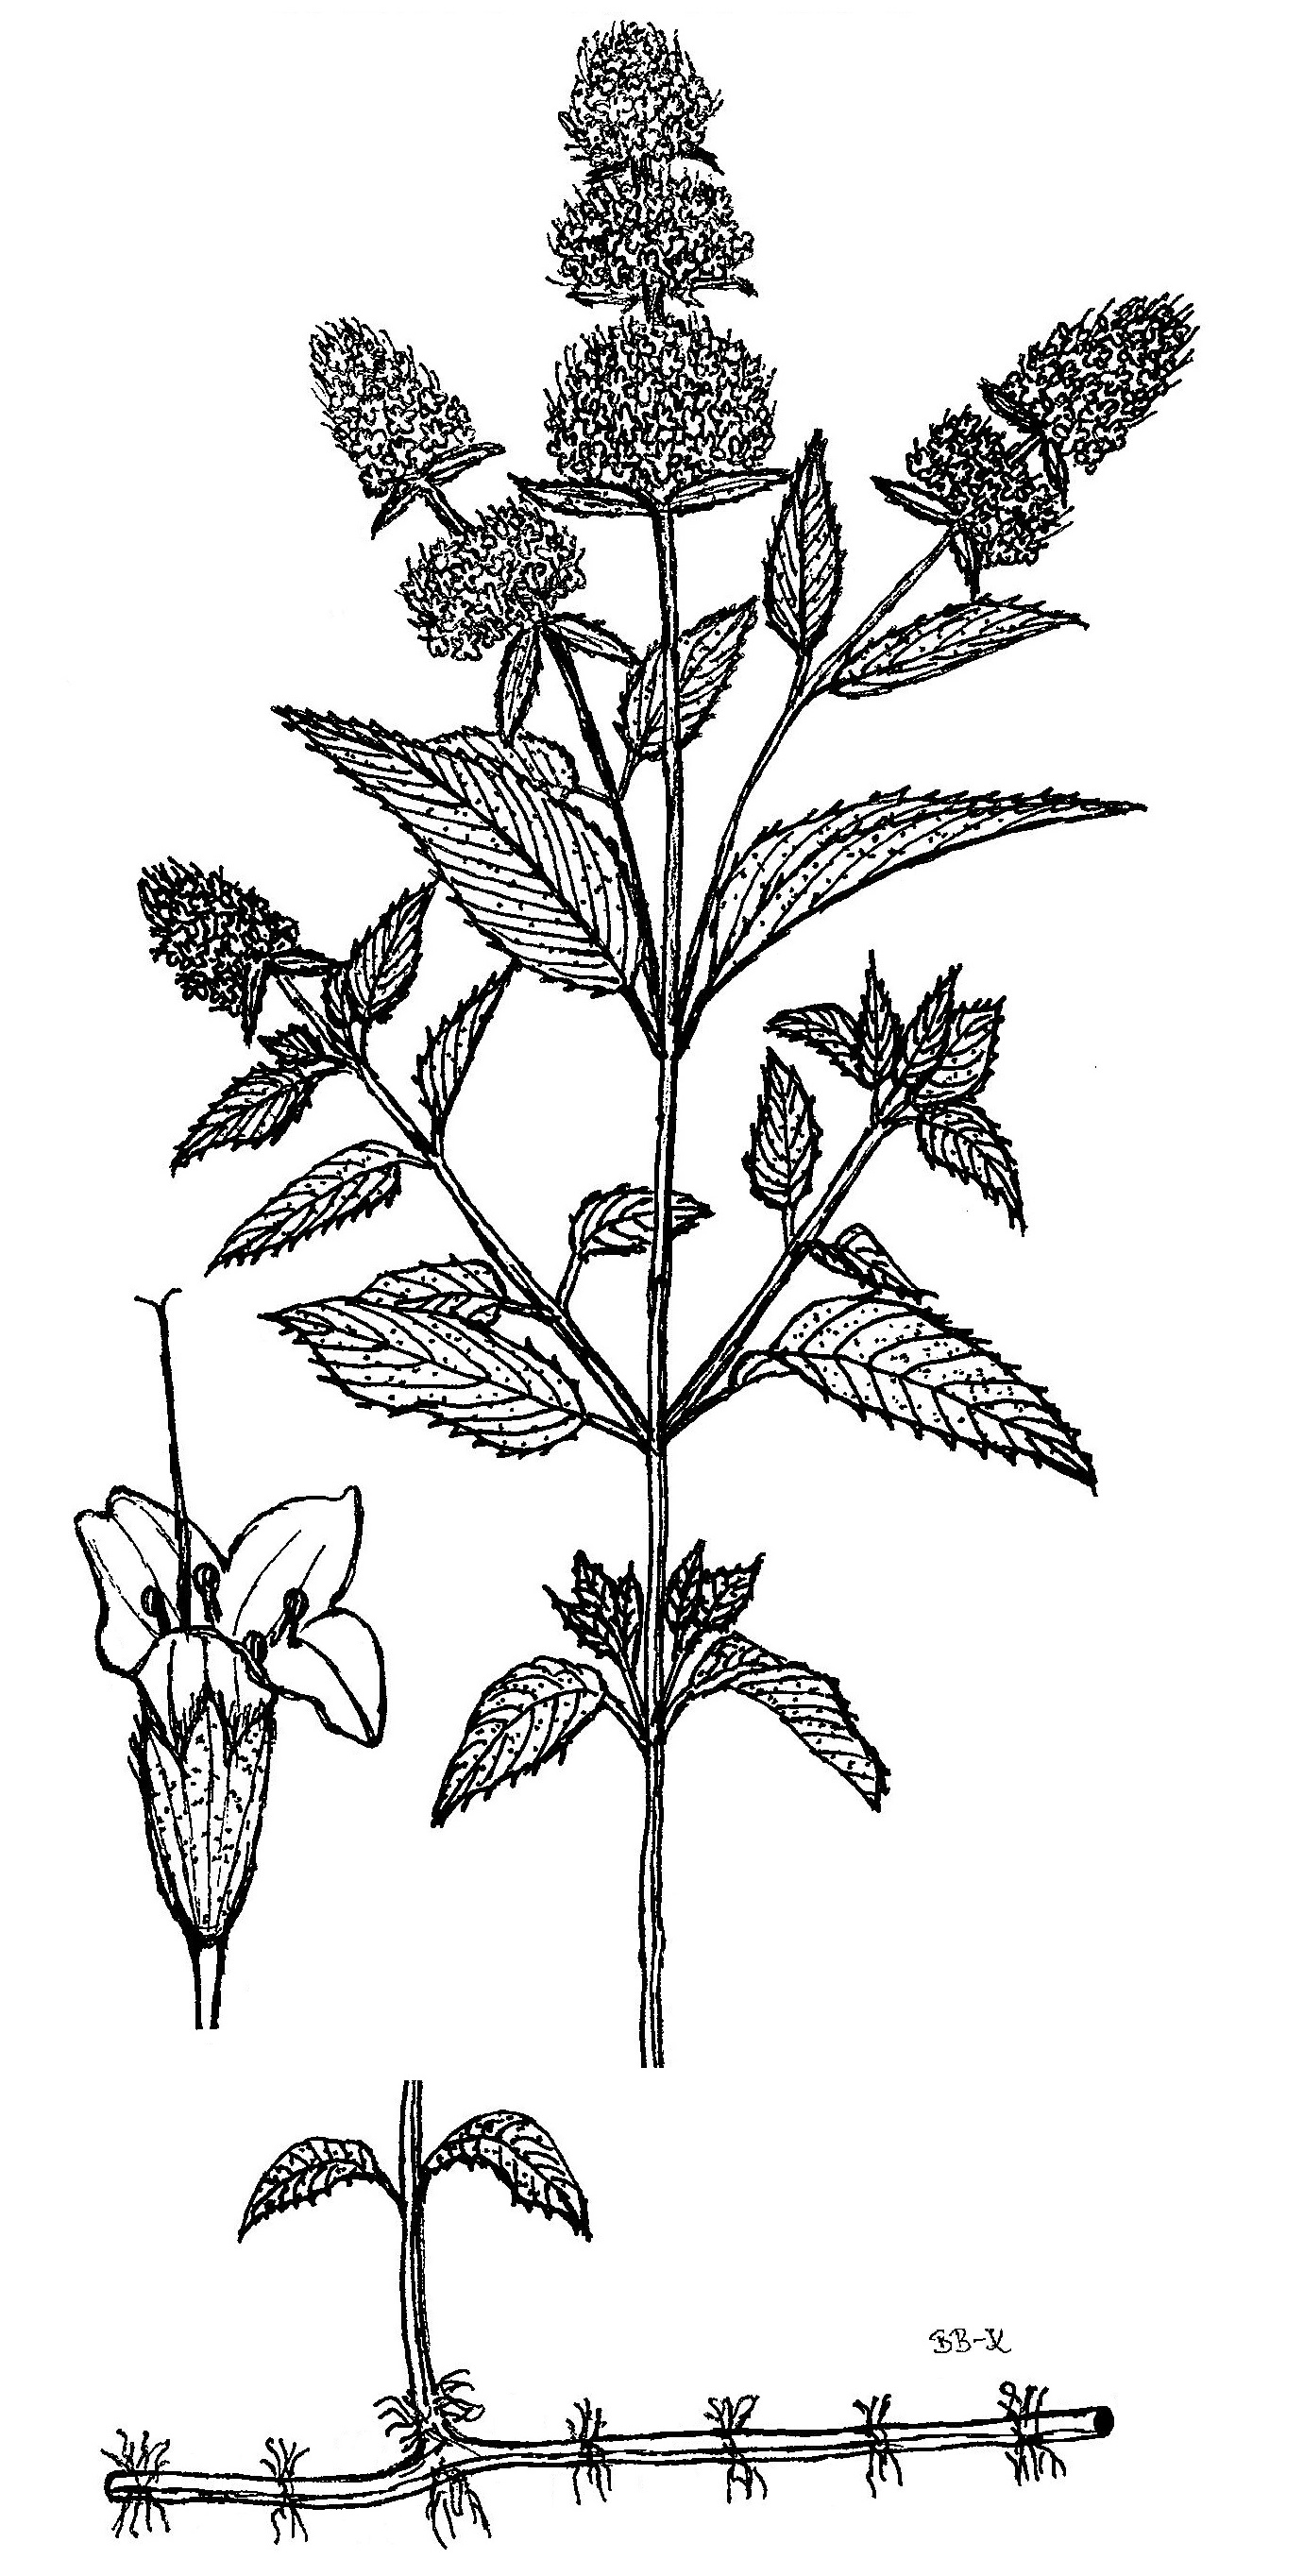 Fig. 1. Mentha ×piperita – shoot and inflorescence, single flower and underground stolons.